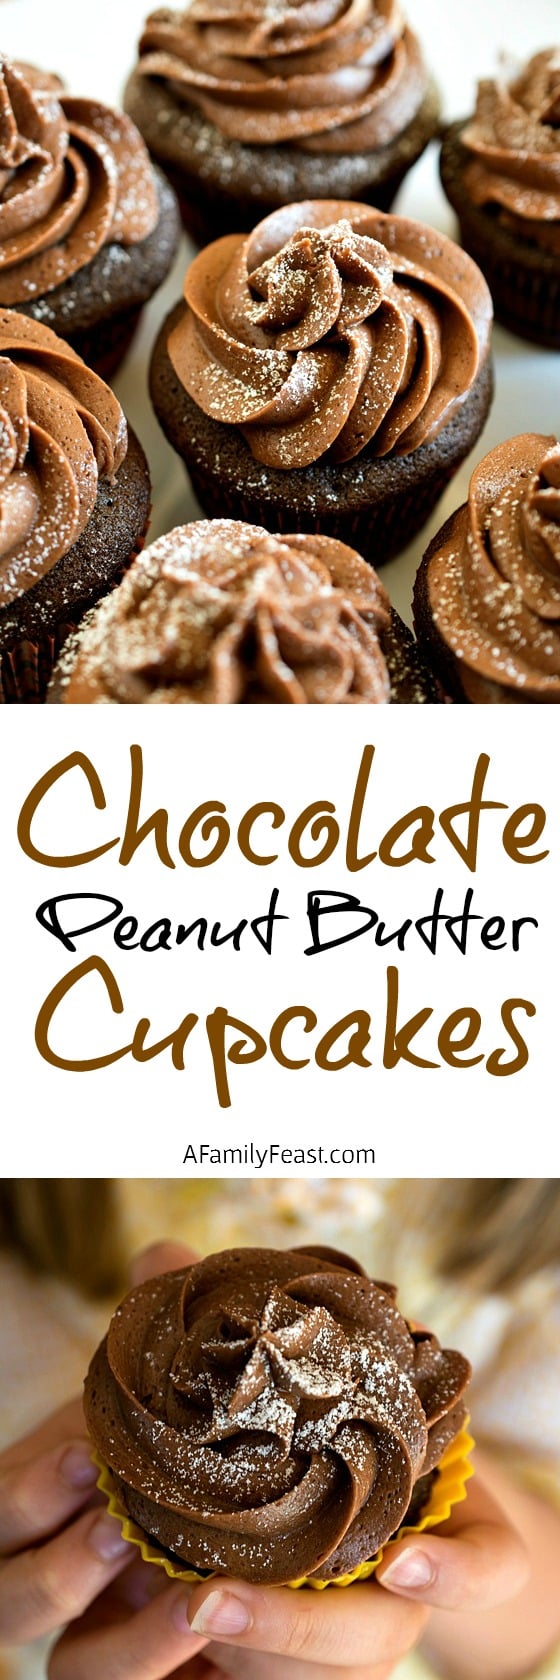 Chocolate Peanut Butter Cupcakes - Kids love to cook and bake! See this delicious recipe inspired by MASTERCHEF JUNIOR on FOX #MasterChefJunior - A Family Feast